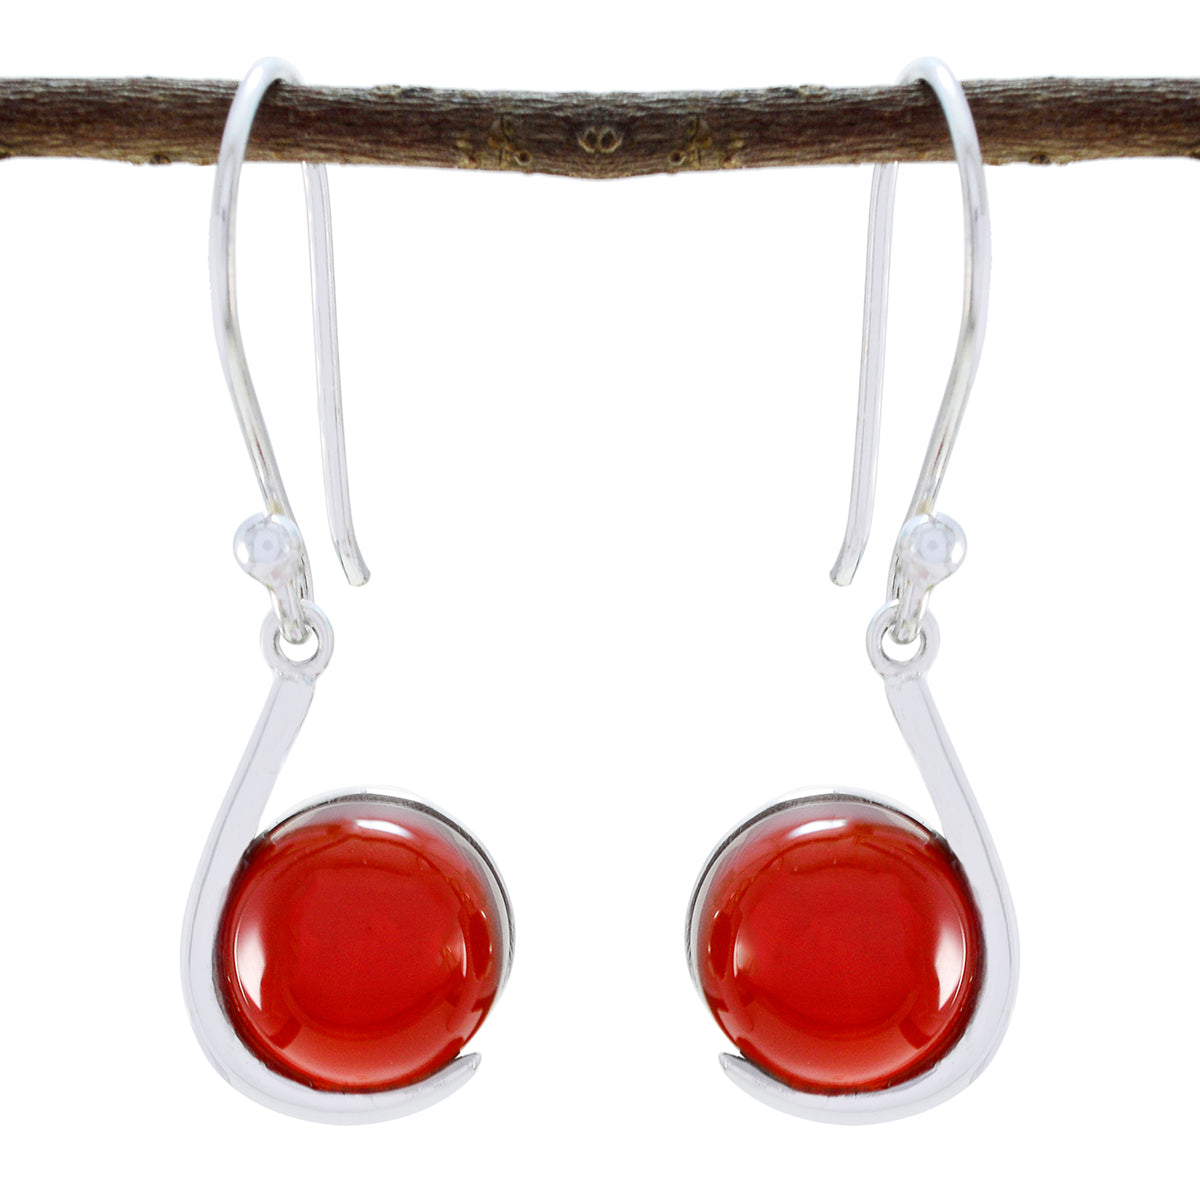 Riyo Good Gemstones round Cabochon Red Onyx Silver Earrings gift for daughter's day